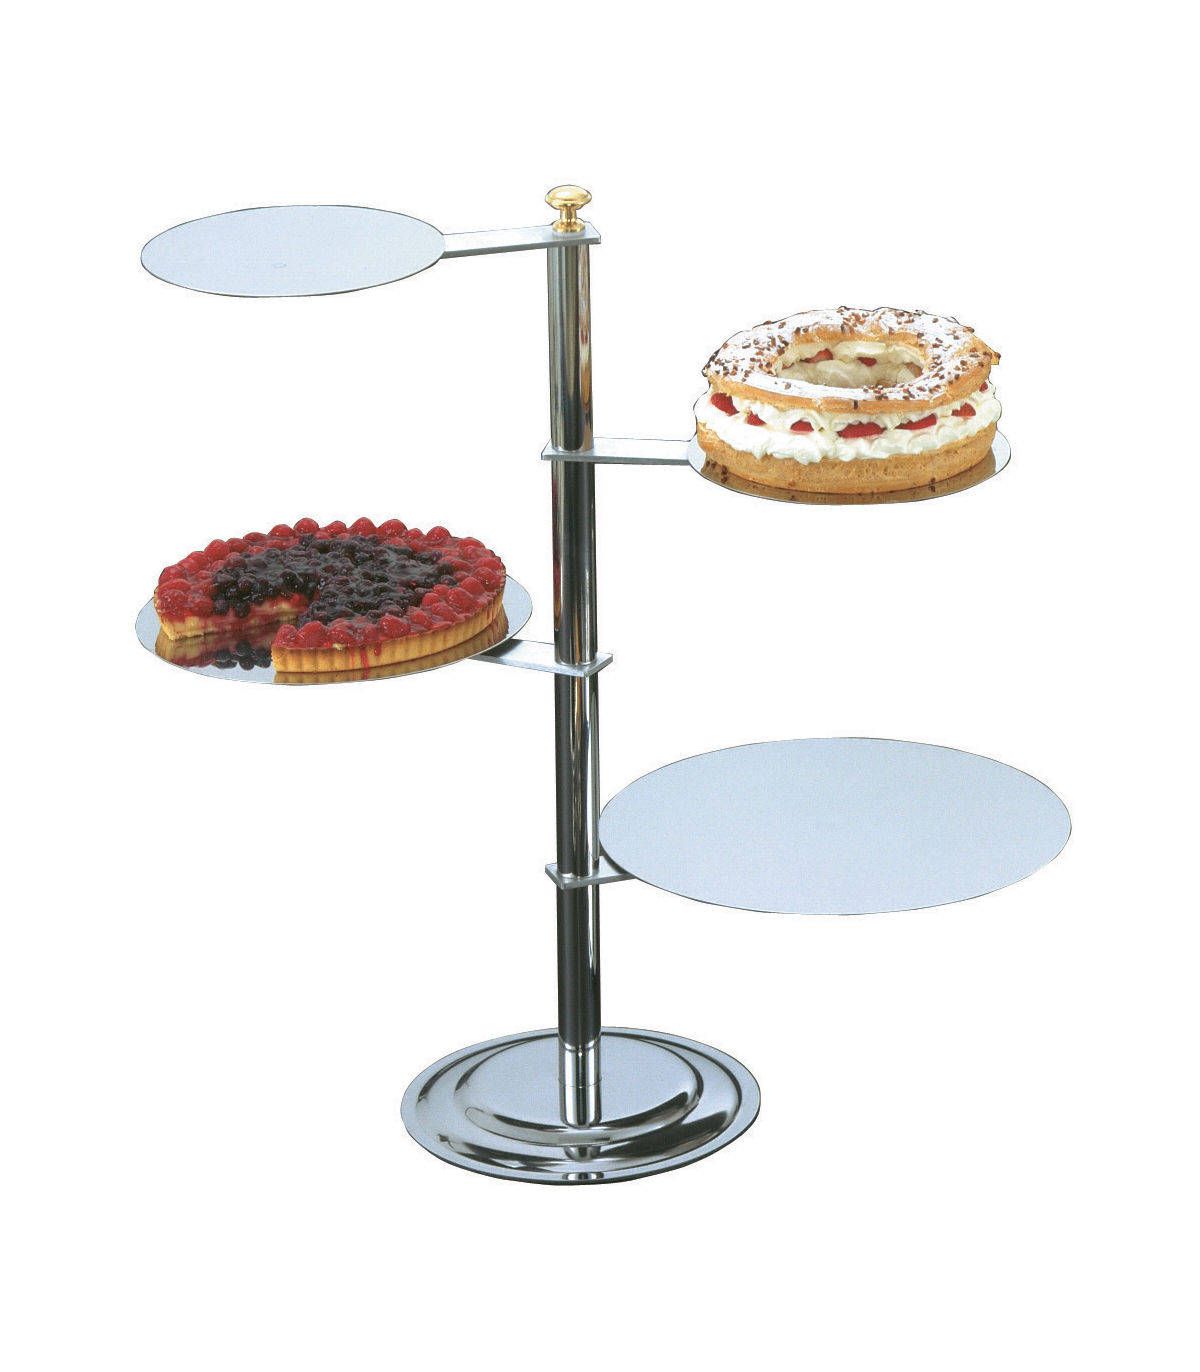 Decostar™ Crystal 3 Tier Cake Stand 26 - Gold